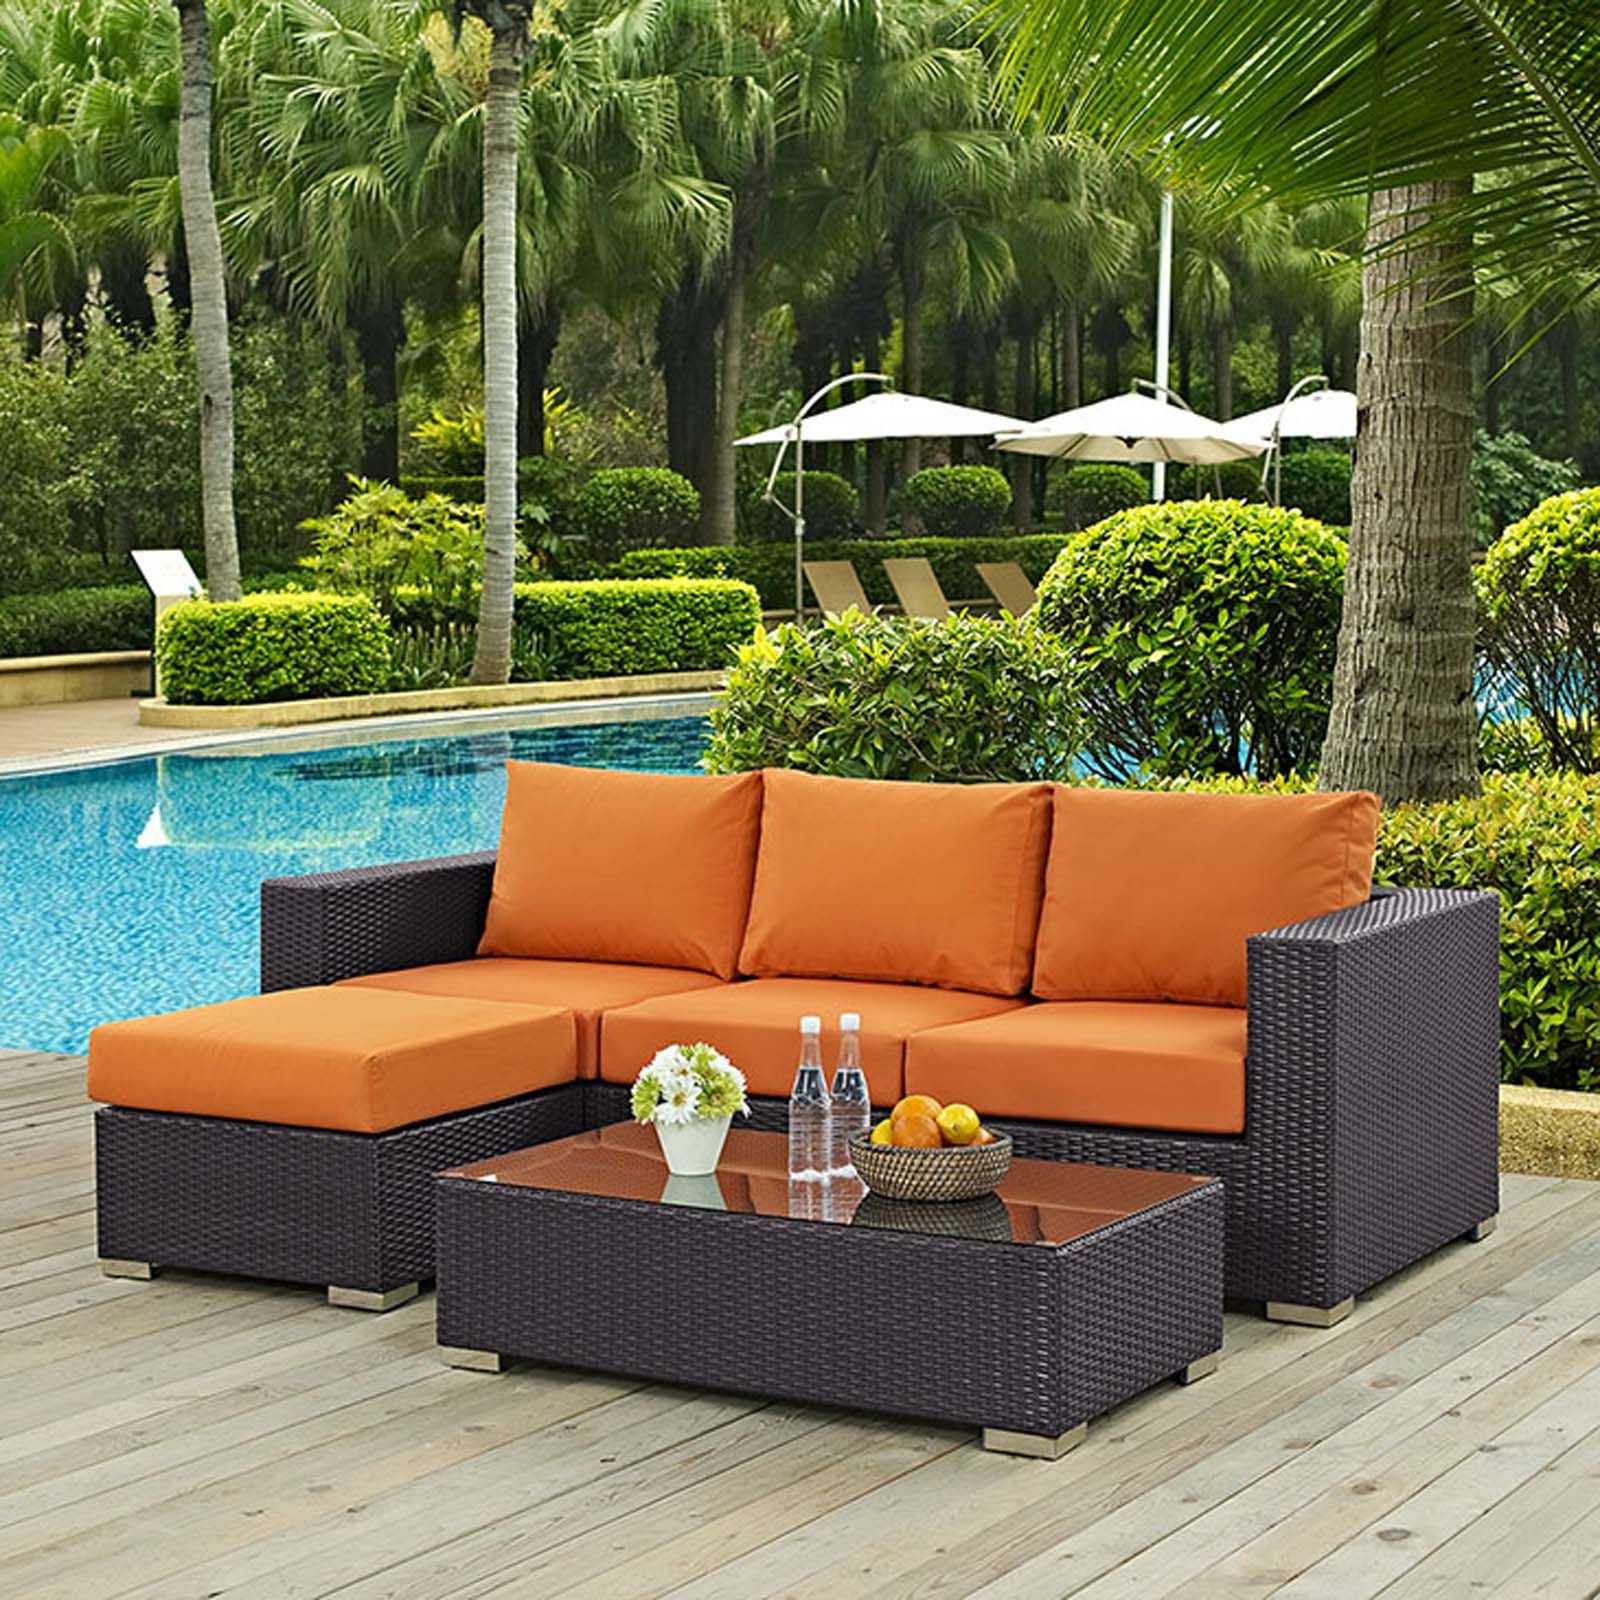 Modterior :: Outdoor :: Sectional Sets :: Convene 3 Piece Outdoor Patio For Popular White Fabric Outdoor Patio Sets (View 13 of 15)